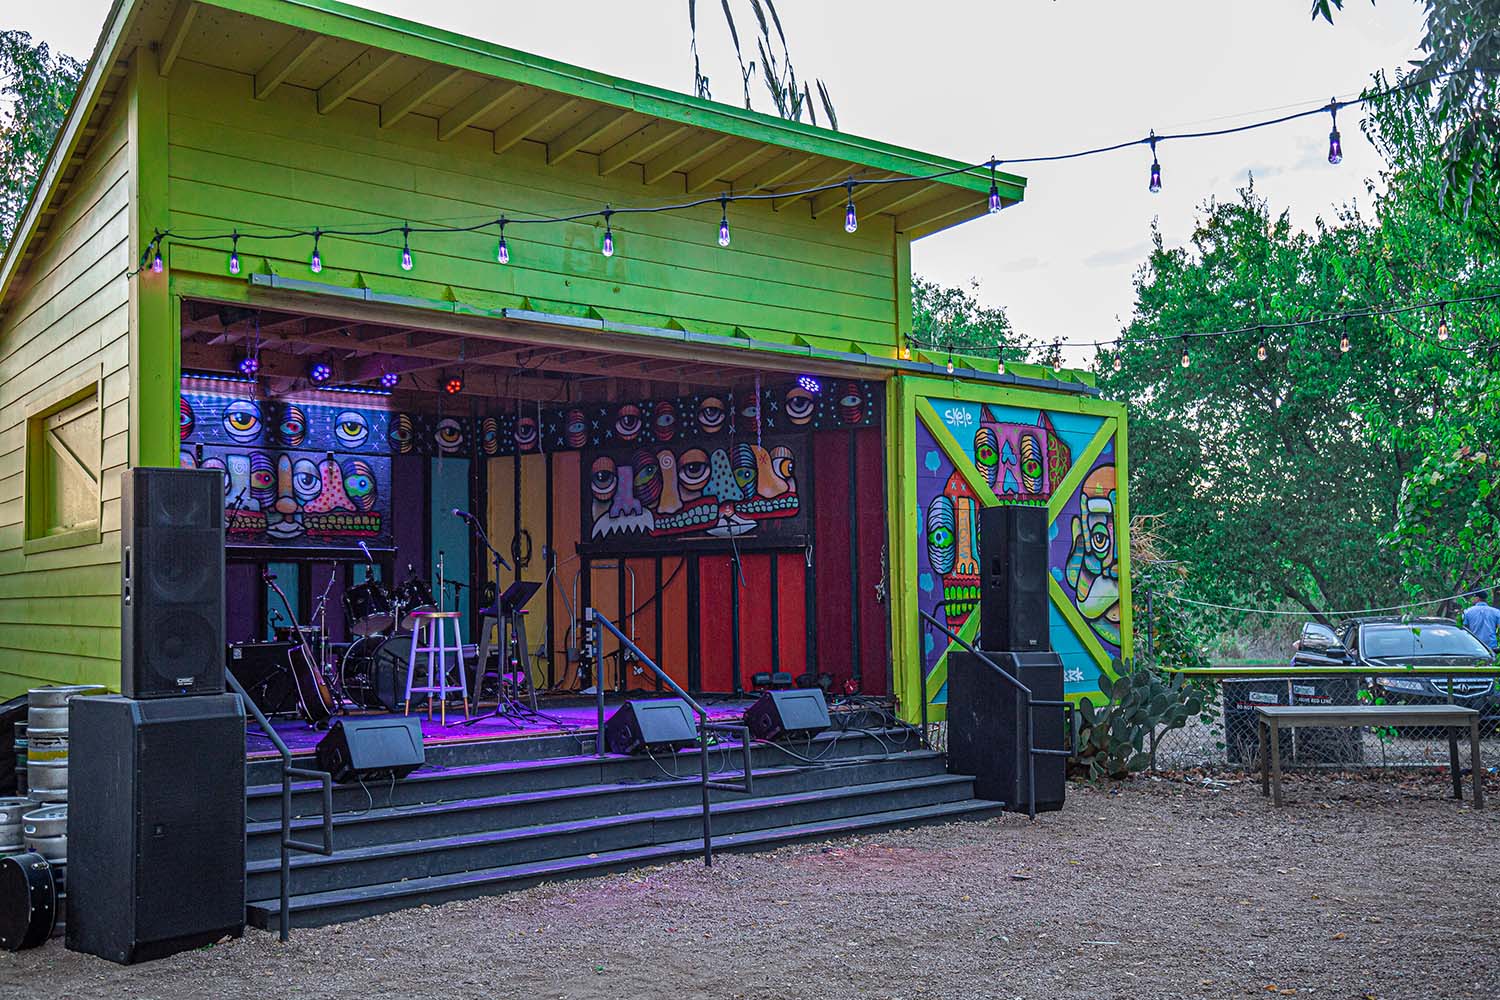 The Far Out Lounge and Stage - Way South Austin bar and live music venue